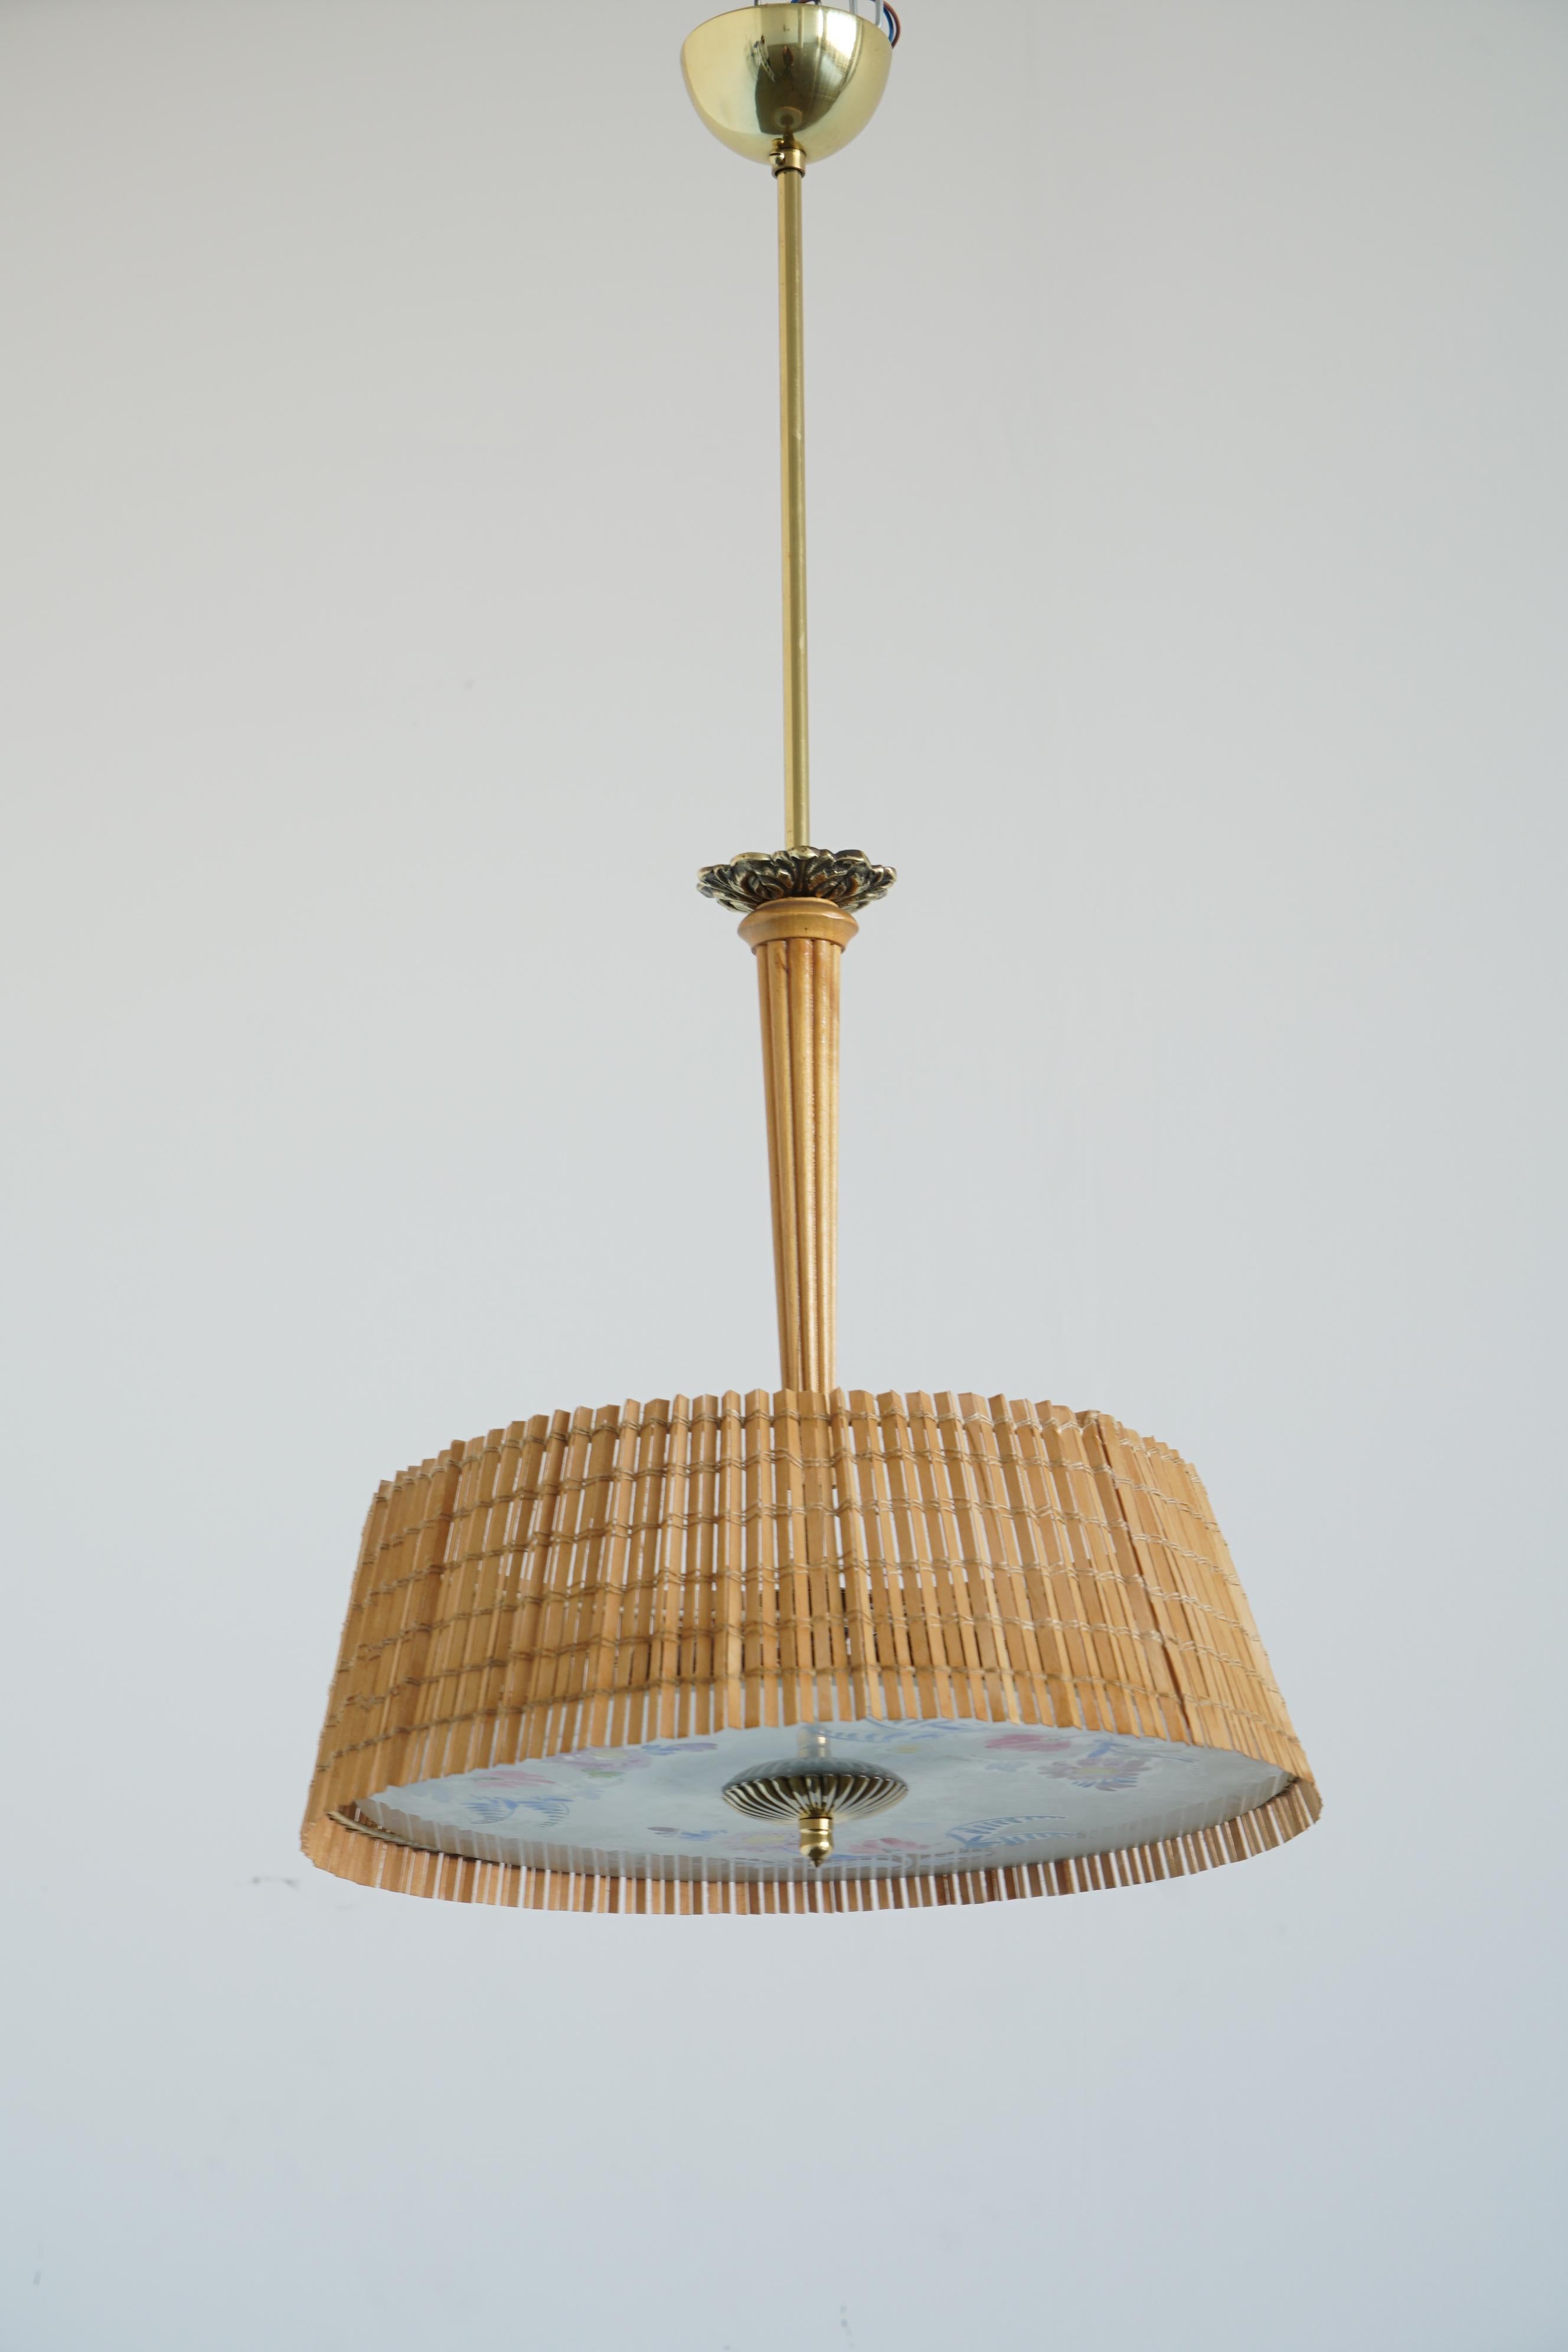 Paavo Tynell's ceiling light with hand painted glass diffuser by Kyllikki Salmenhaara, manufactured by Taito Oy, Finland, 1940-50s.
2 Edison sockets.
Two fixtures available with different paint pattern.
Rewiring available upon request.